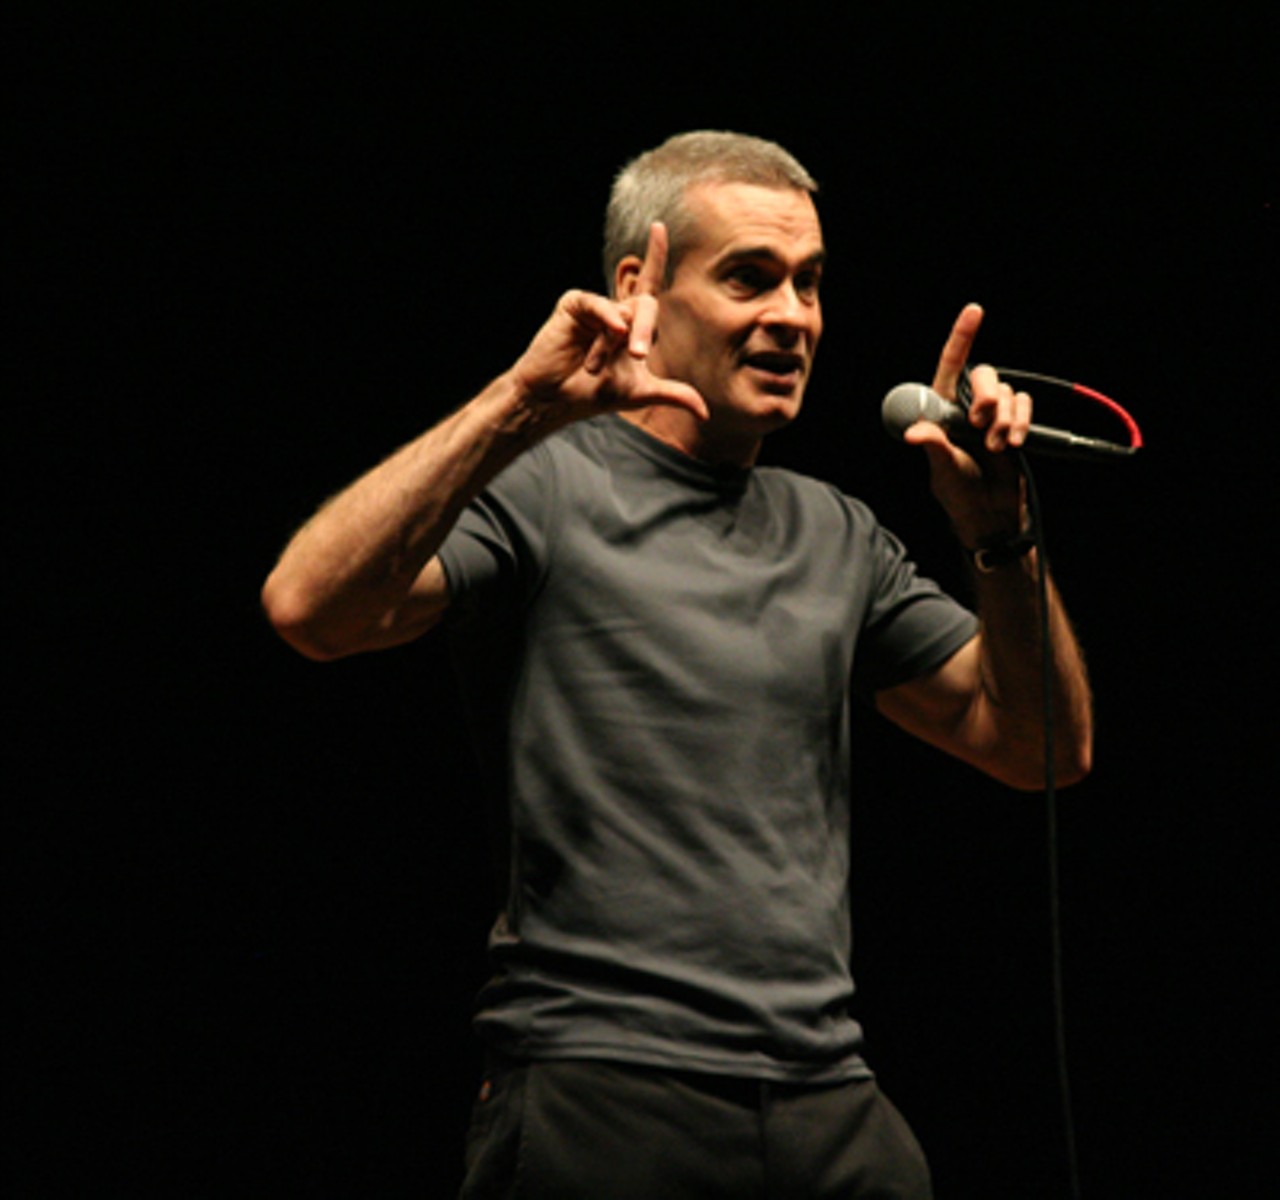 Spielberg Rollins. 
Read a recap of Rollins' spoken word performance in A to Z.
Read an interview with Rollins in this week's edition, "Get in the Van: Henry Rollins &mdash; musician, spoken-word artist, writer and punk legend &mdash; talks about life on the road.". 
We also posted outtakes from that interview in A to Z.